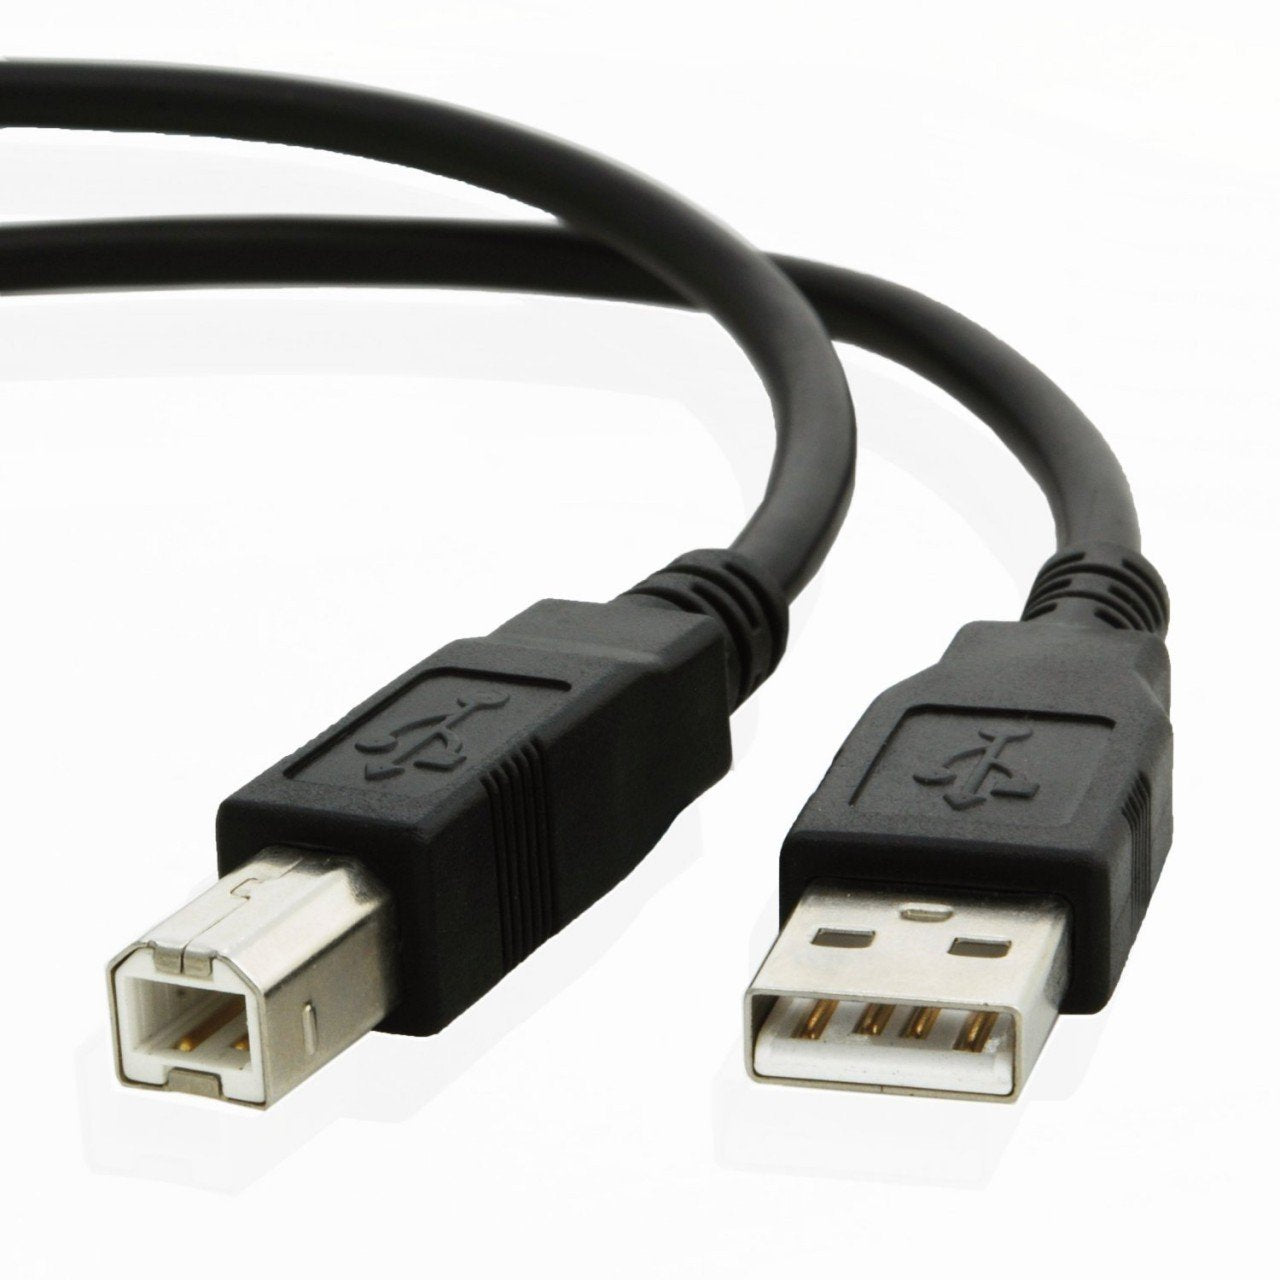 USB cable for Epson WORKFORCE PRO WF-5690